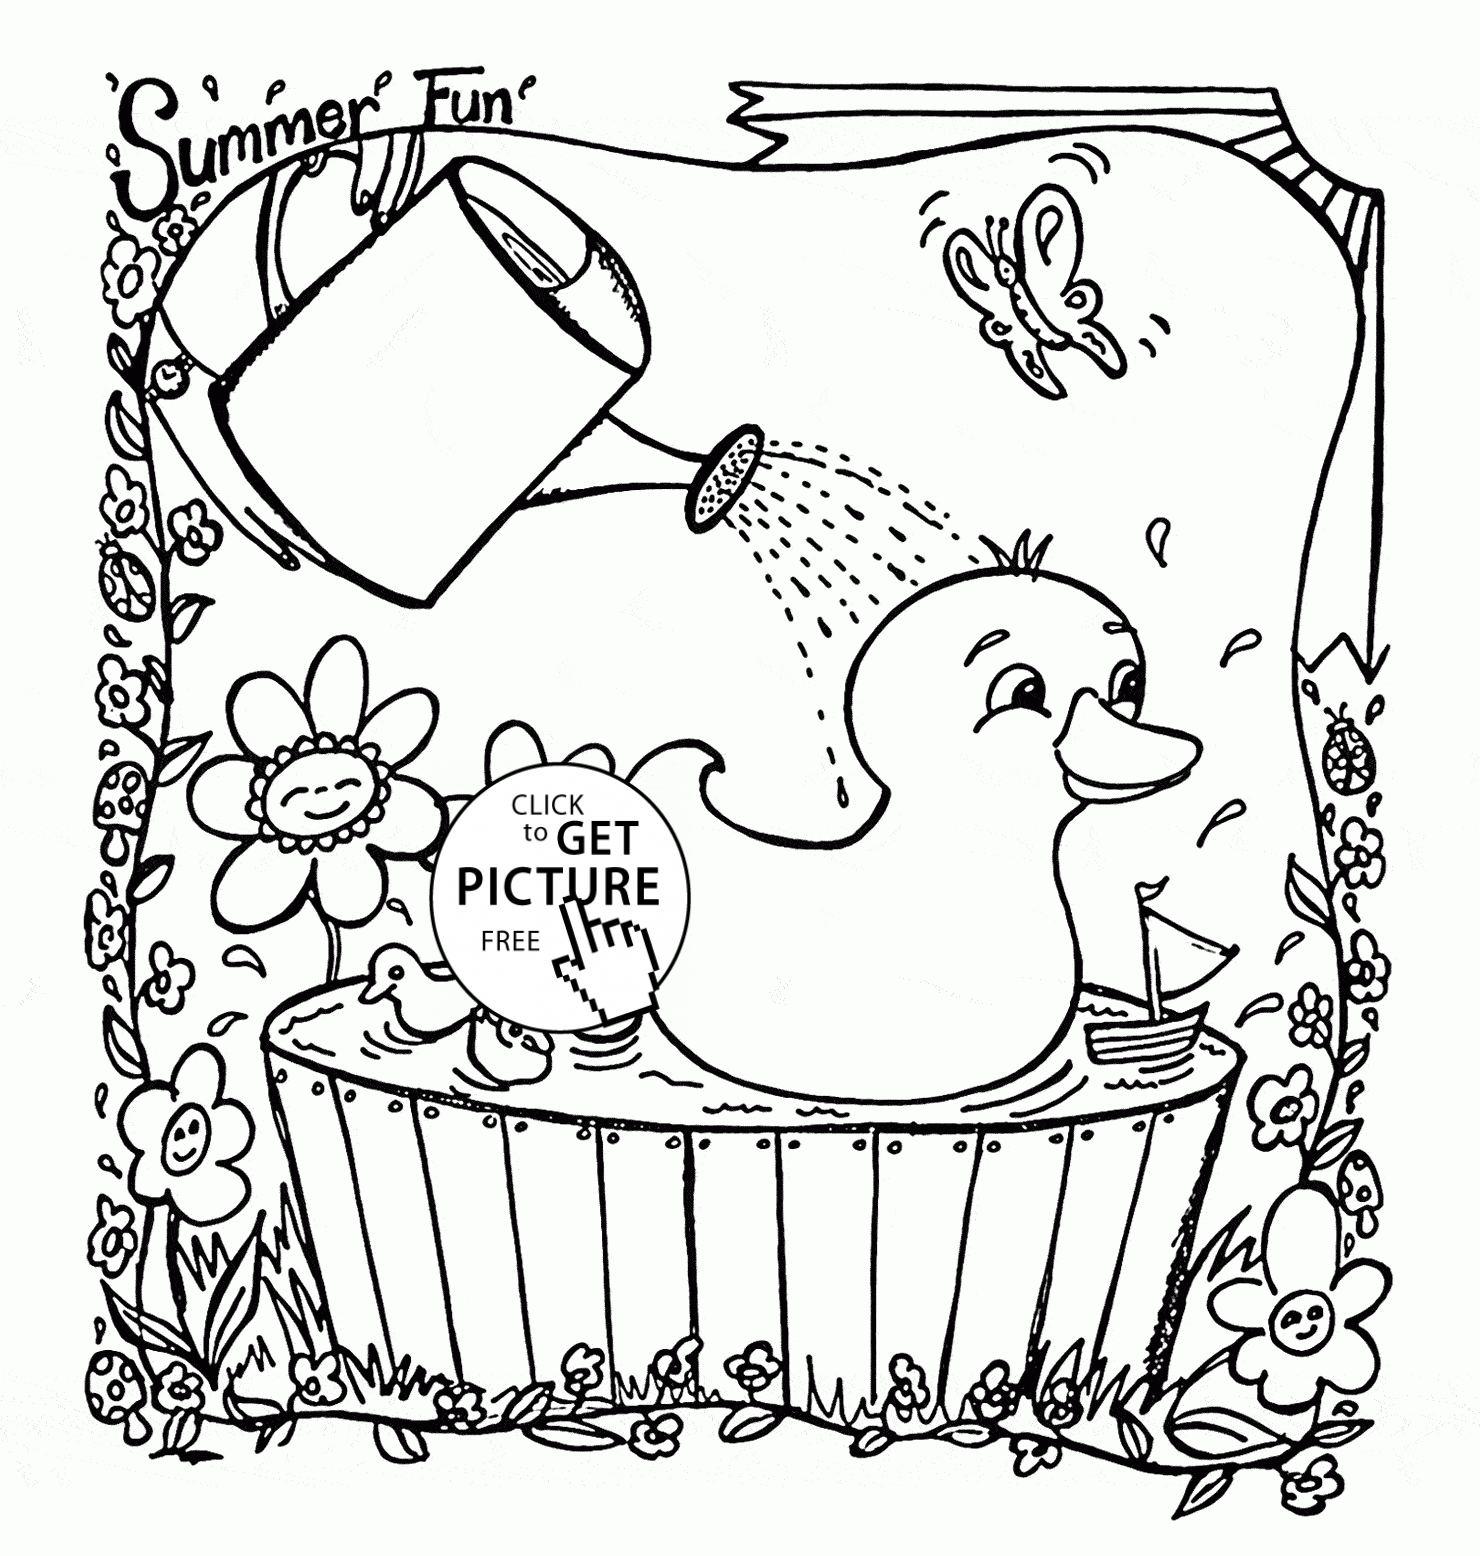 Cute Ducks coloring page for kids, summer coloring pages ...